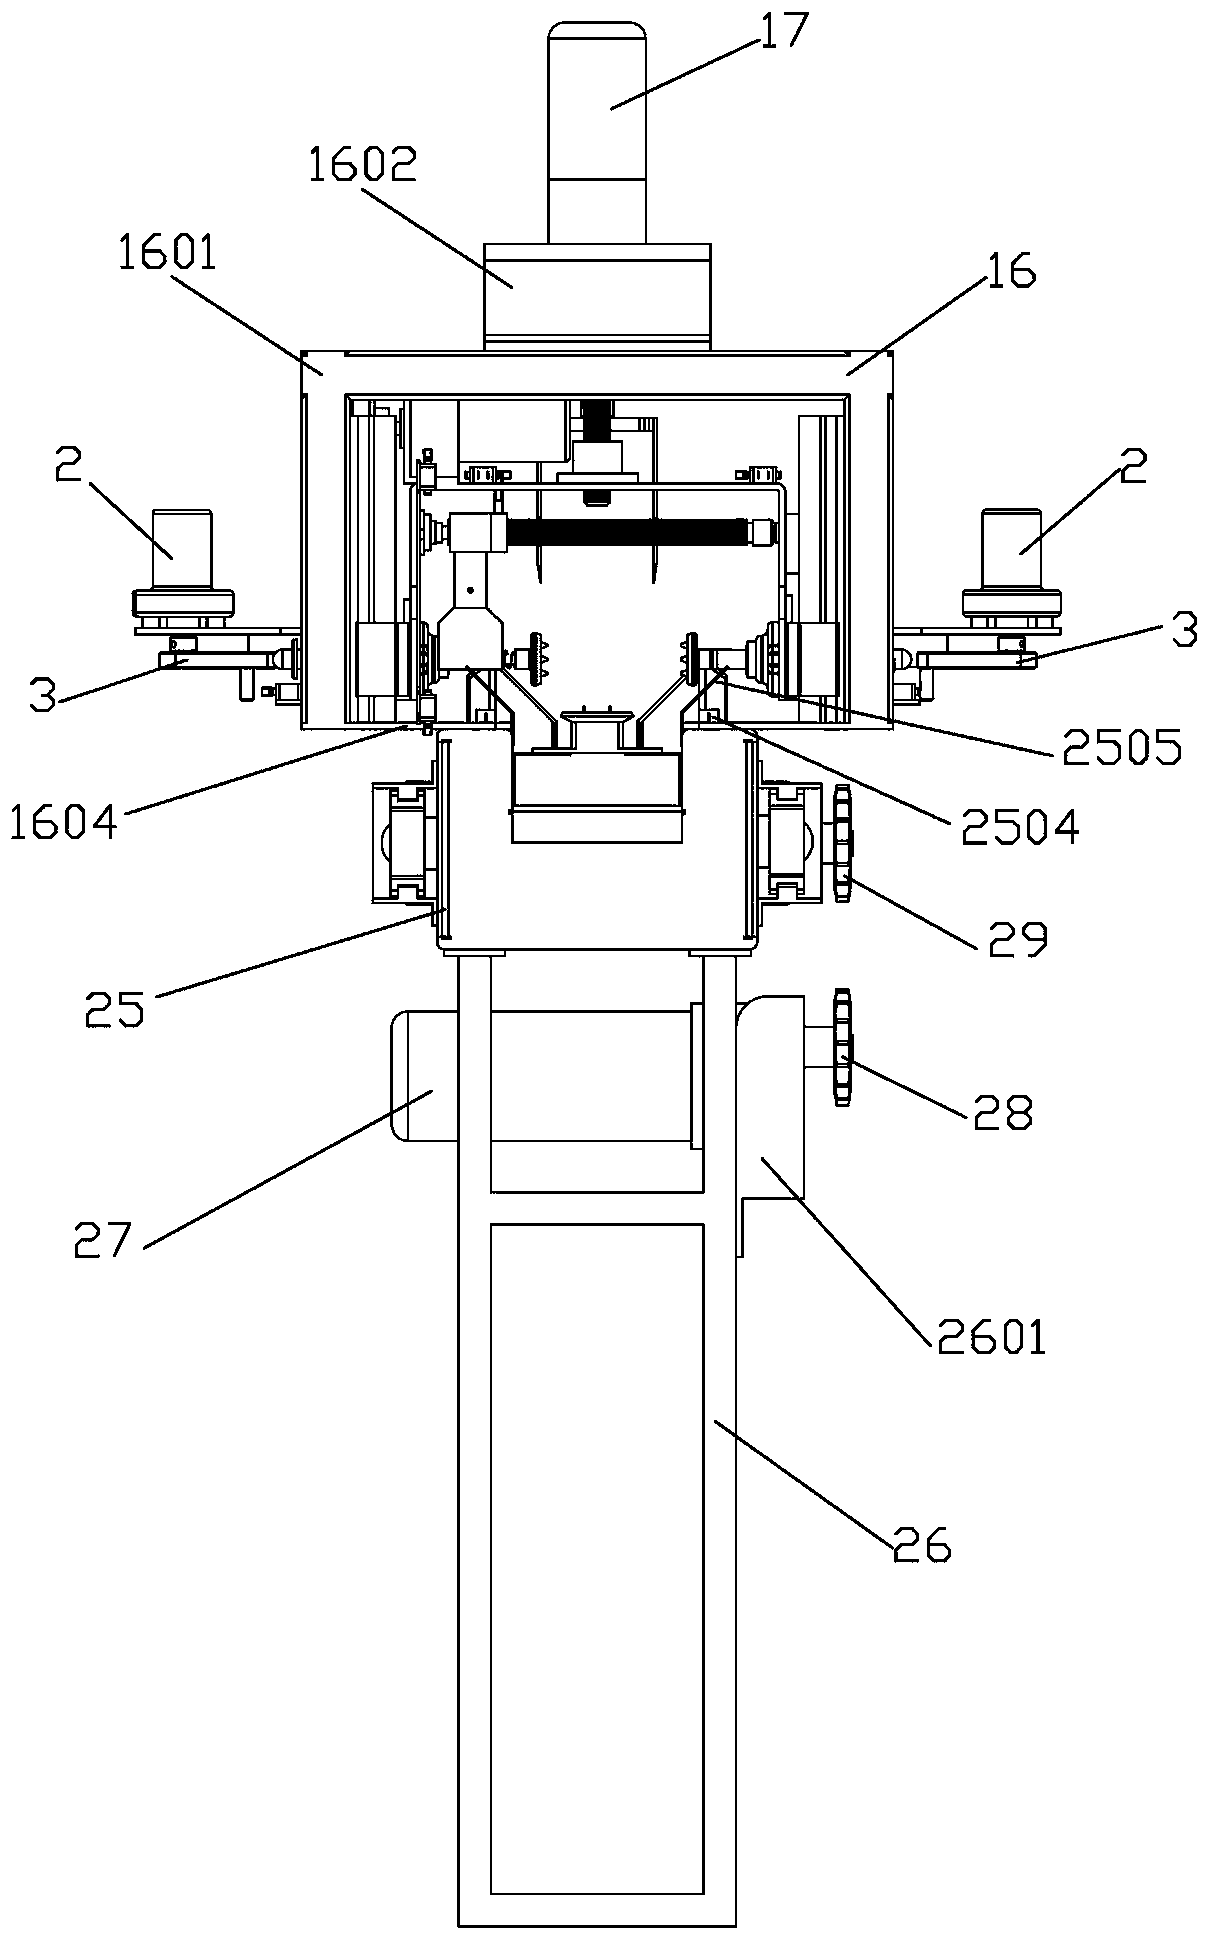 Peeling device for juicer